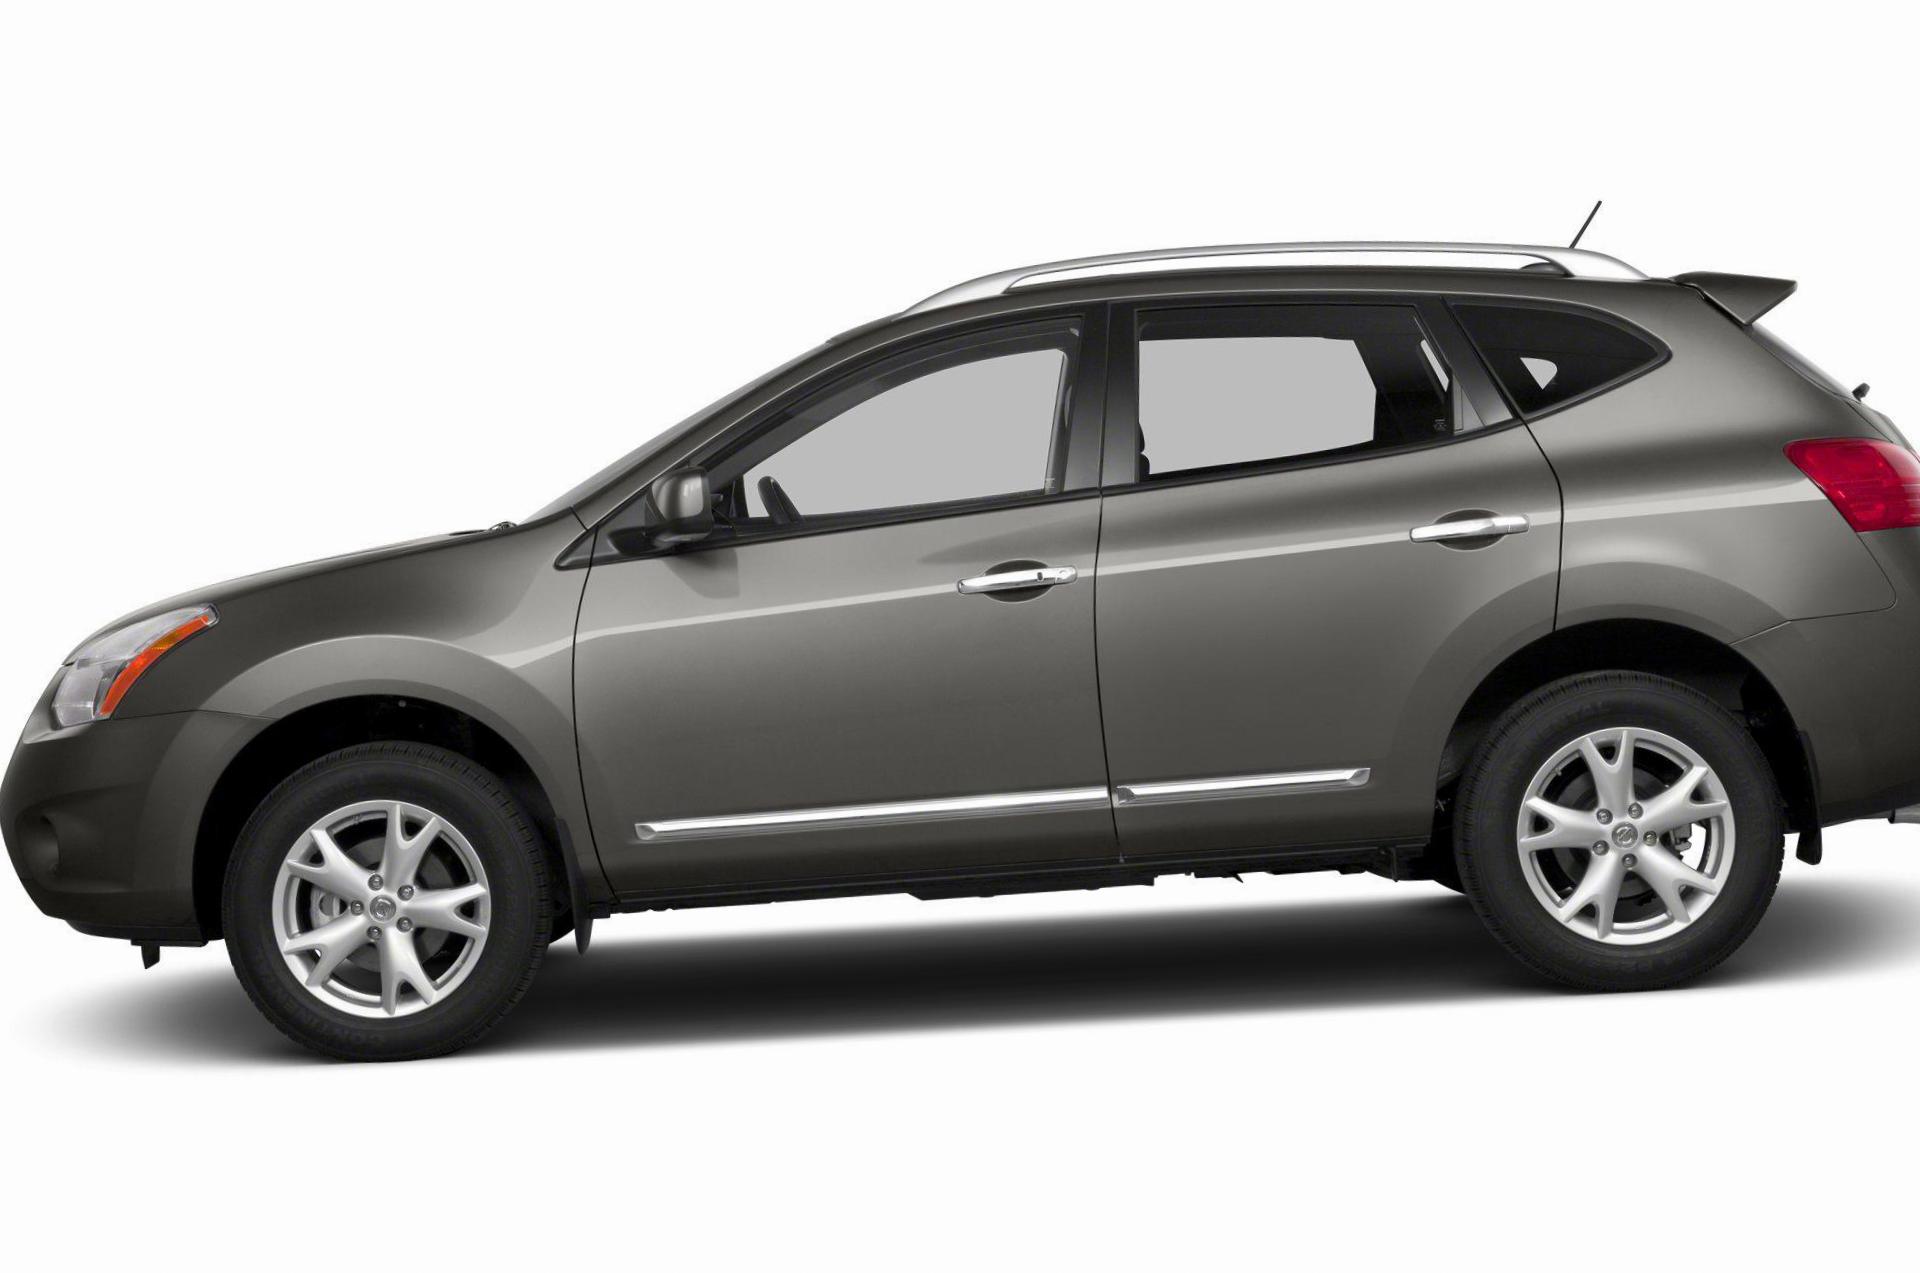 Rogue Nissan lease 2012